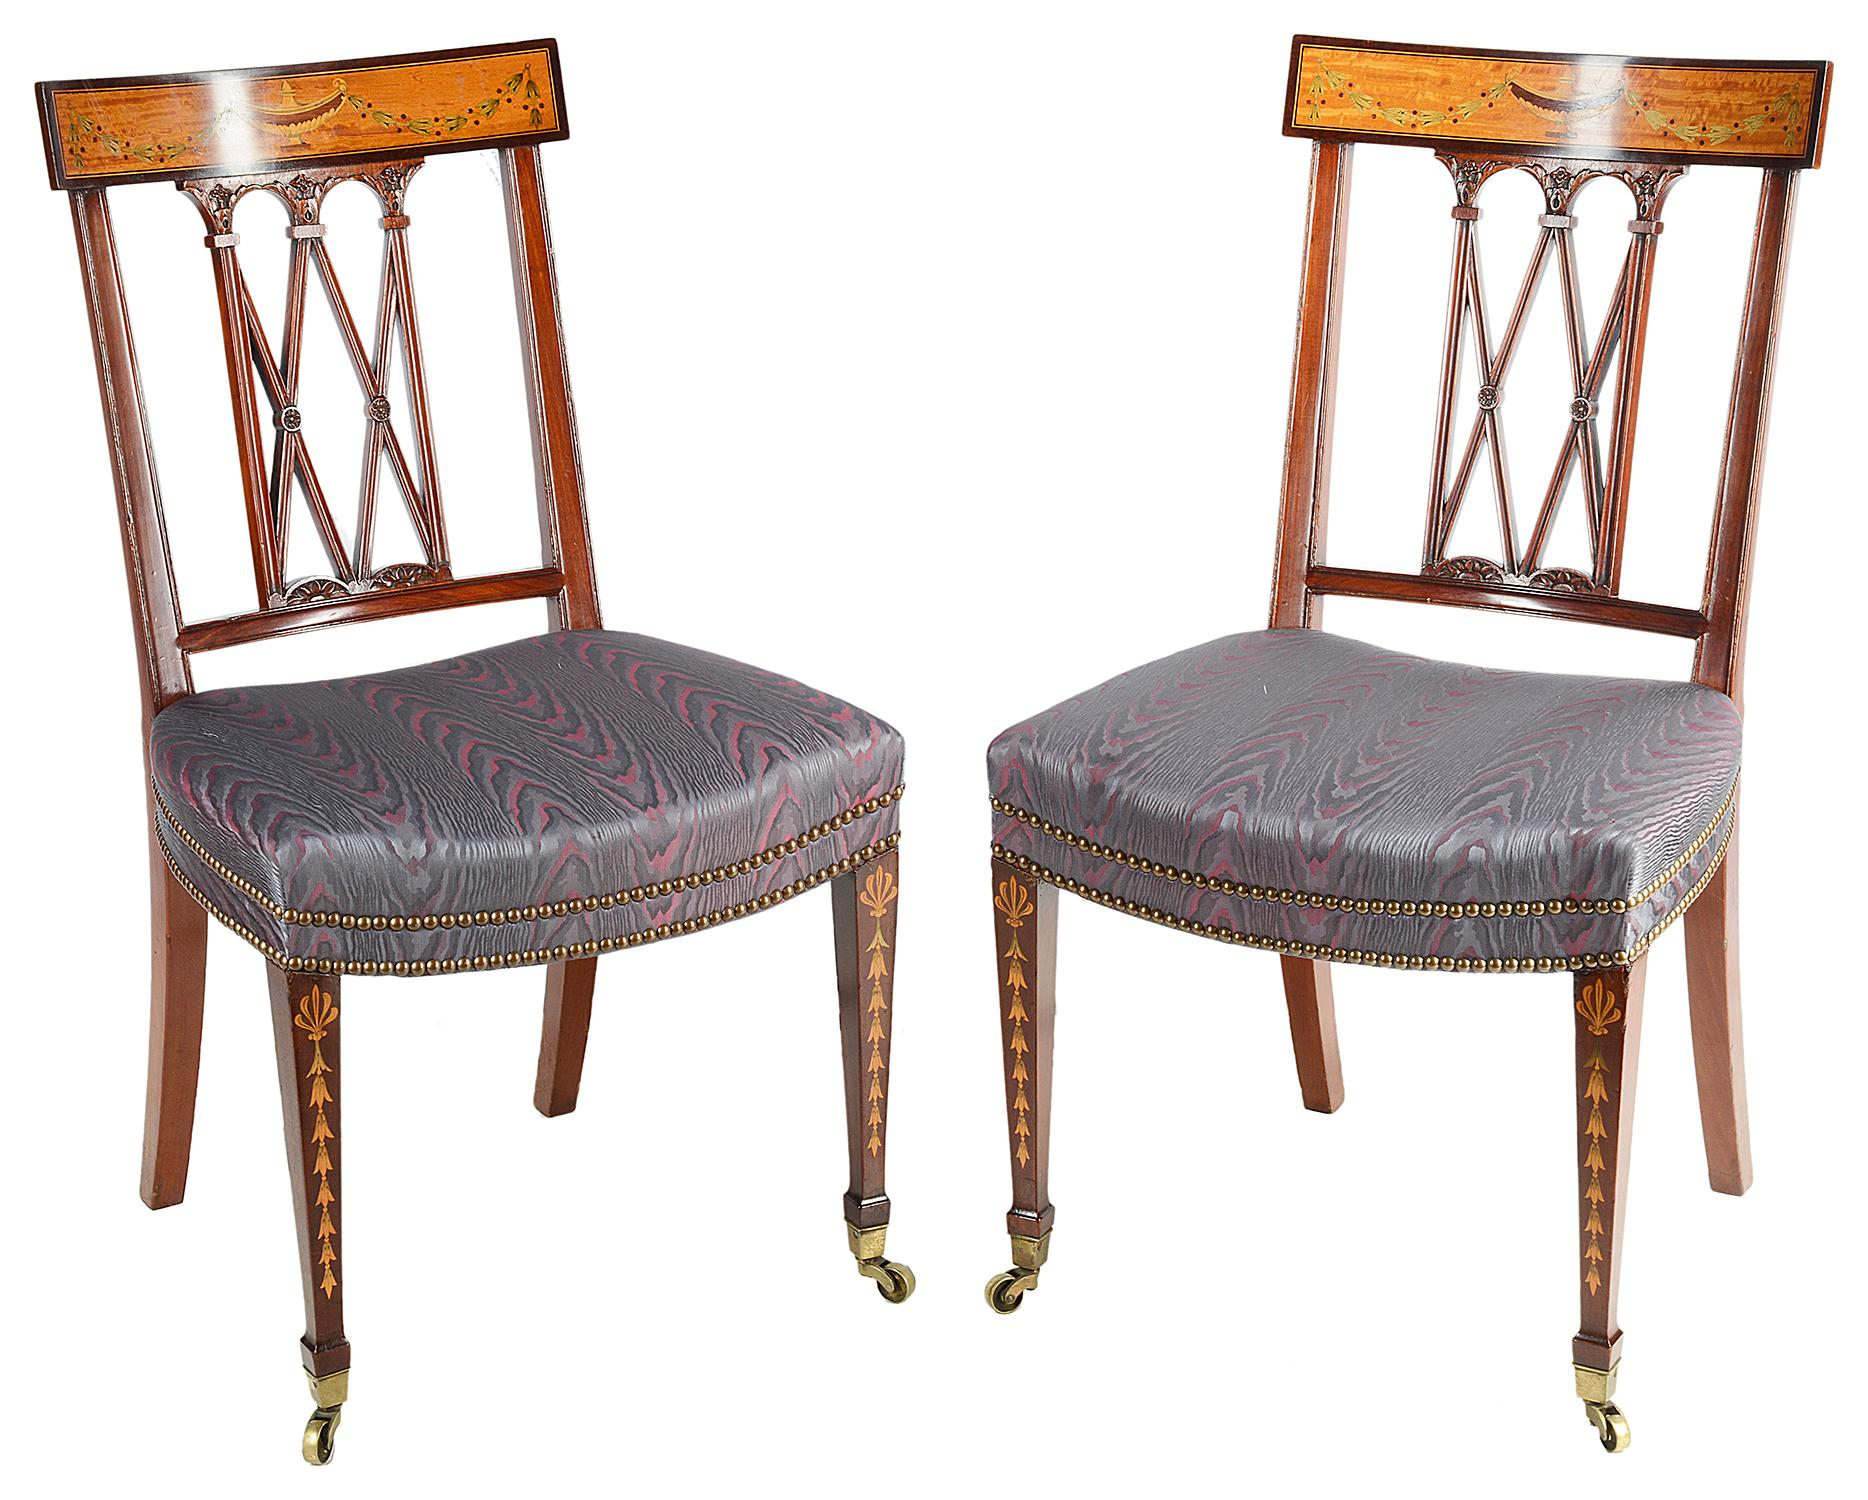 A very good quality set of twelve Sheraton Revival mahogany inlaid dining chairs, each with beautiful marquetry inlaid urns and swags to the satinwood backrests, and carved X-frames. The stuff-over upholstered seats with brass studs, raised on